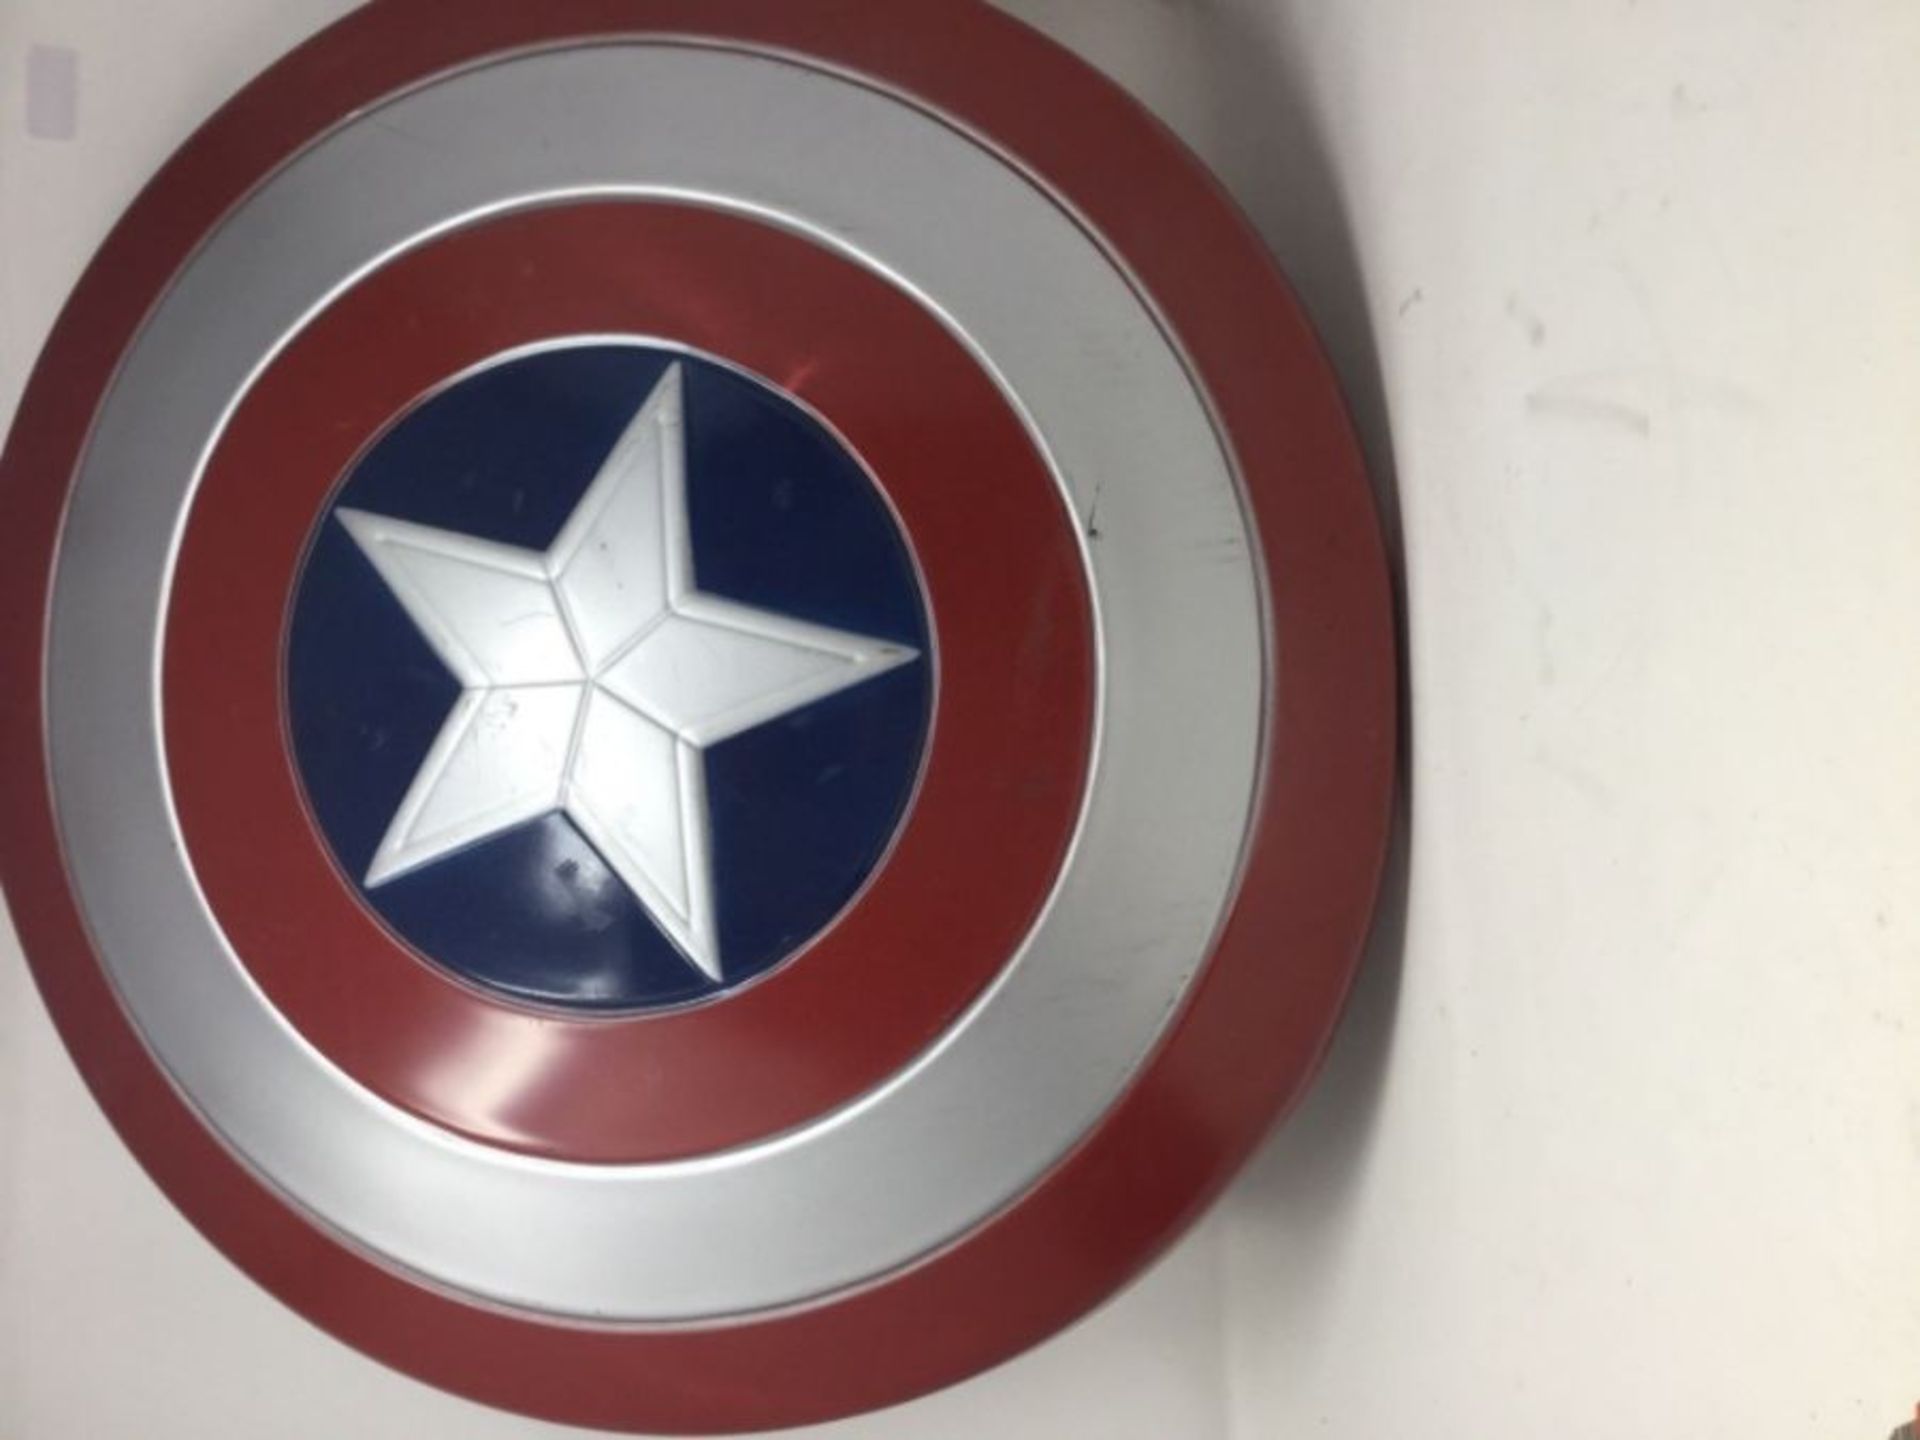 Rubie's Official Marvel Avengers 24-inch Captain America Shield Adults - One Size Cost - Image 2 of 2